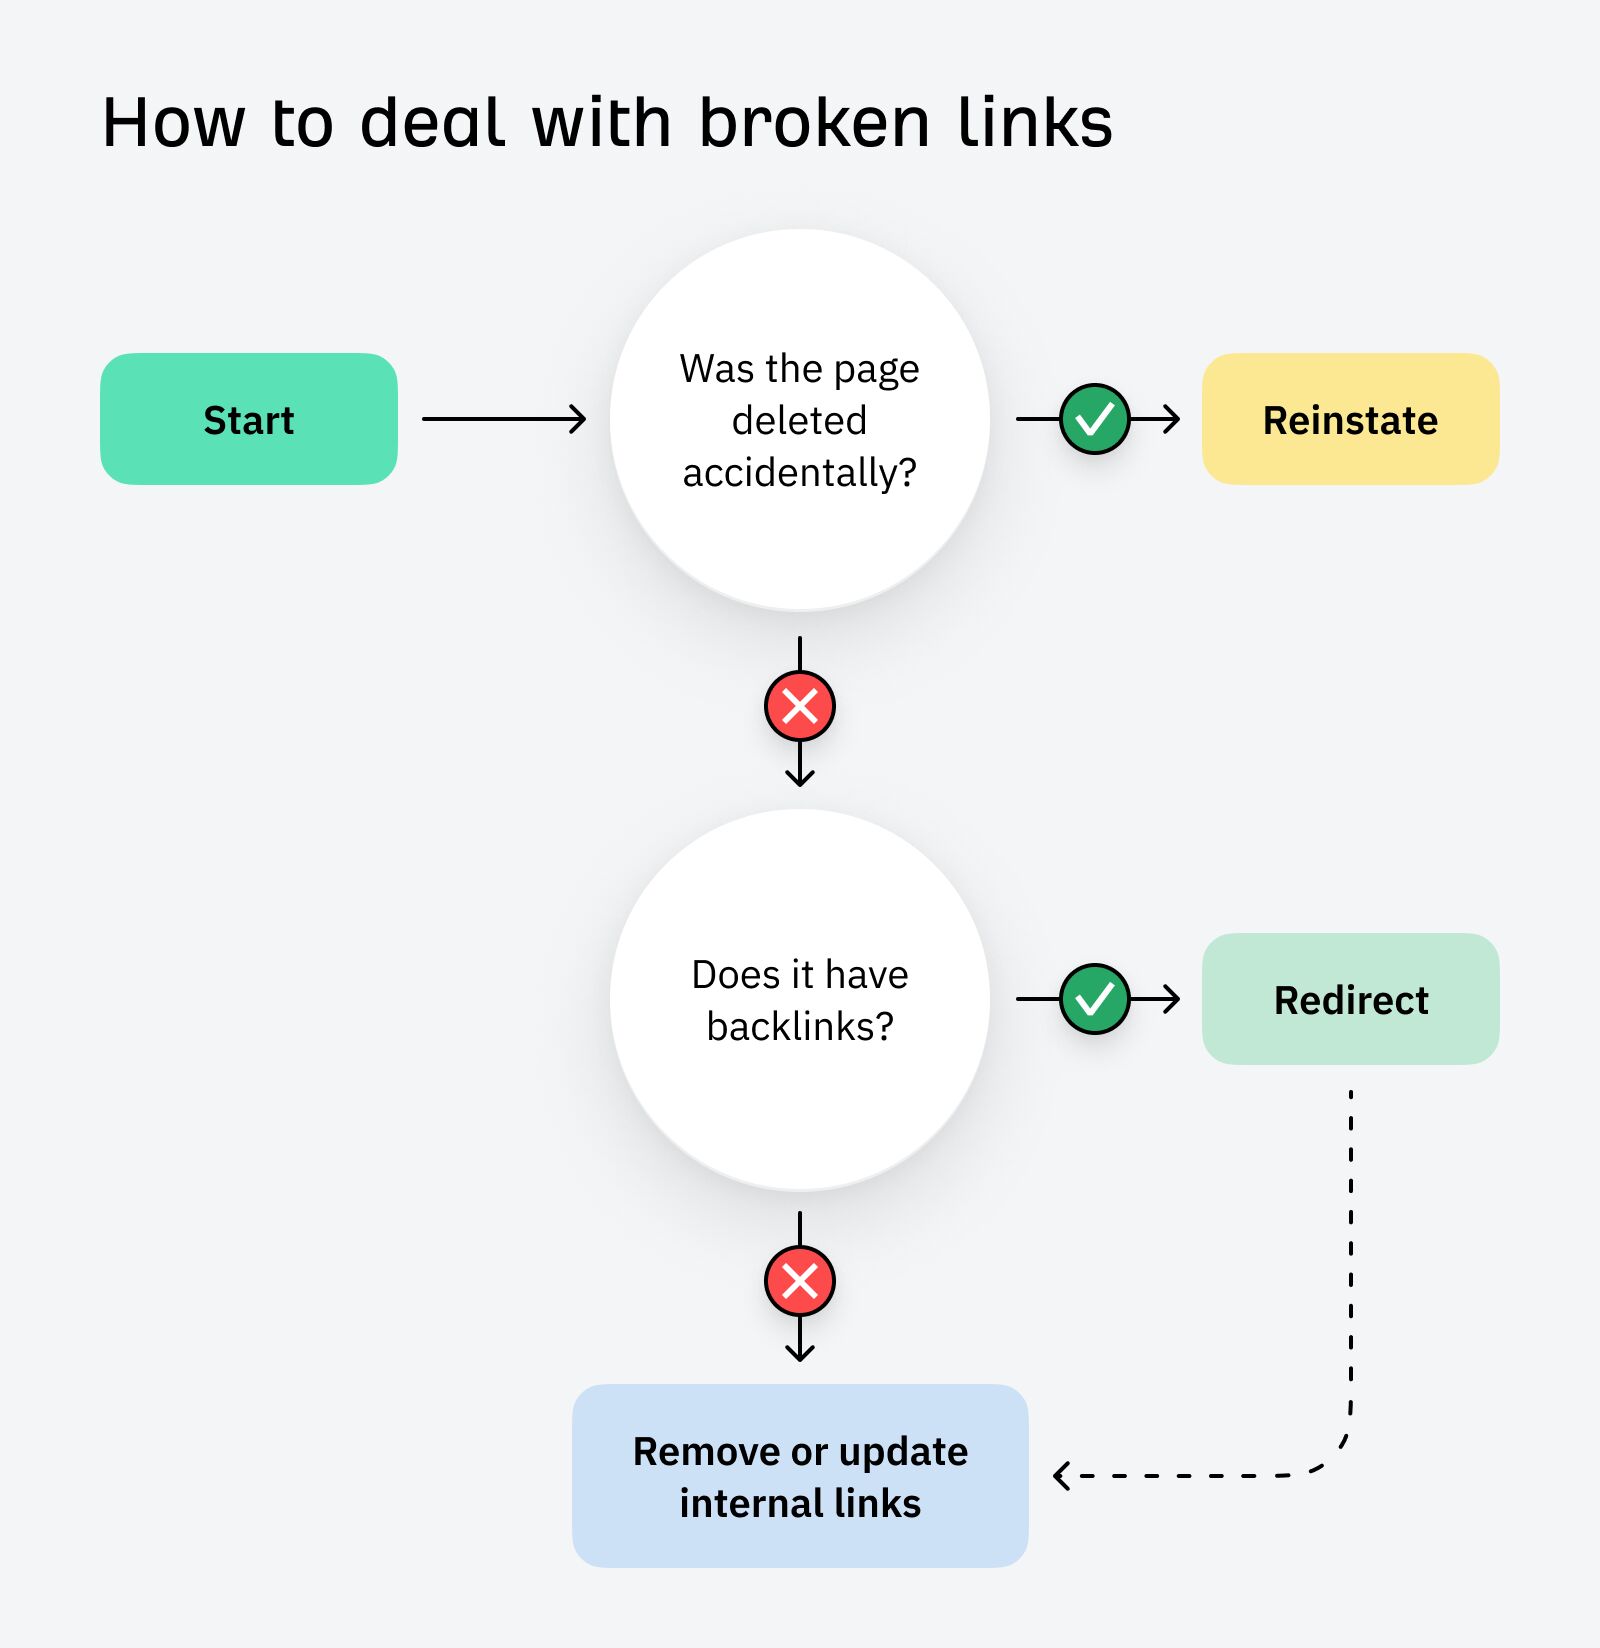 How to deal with broken links illustration